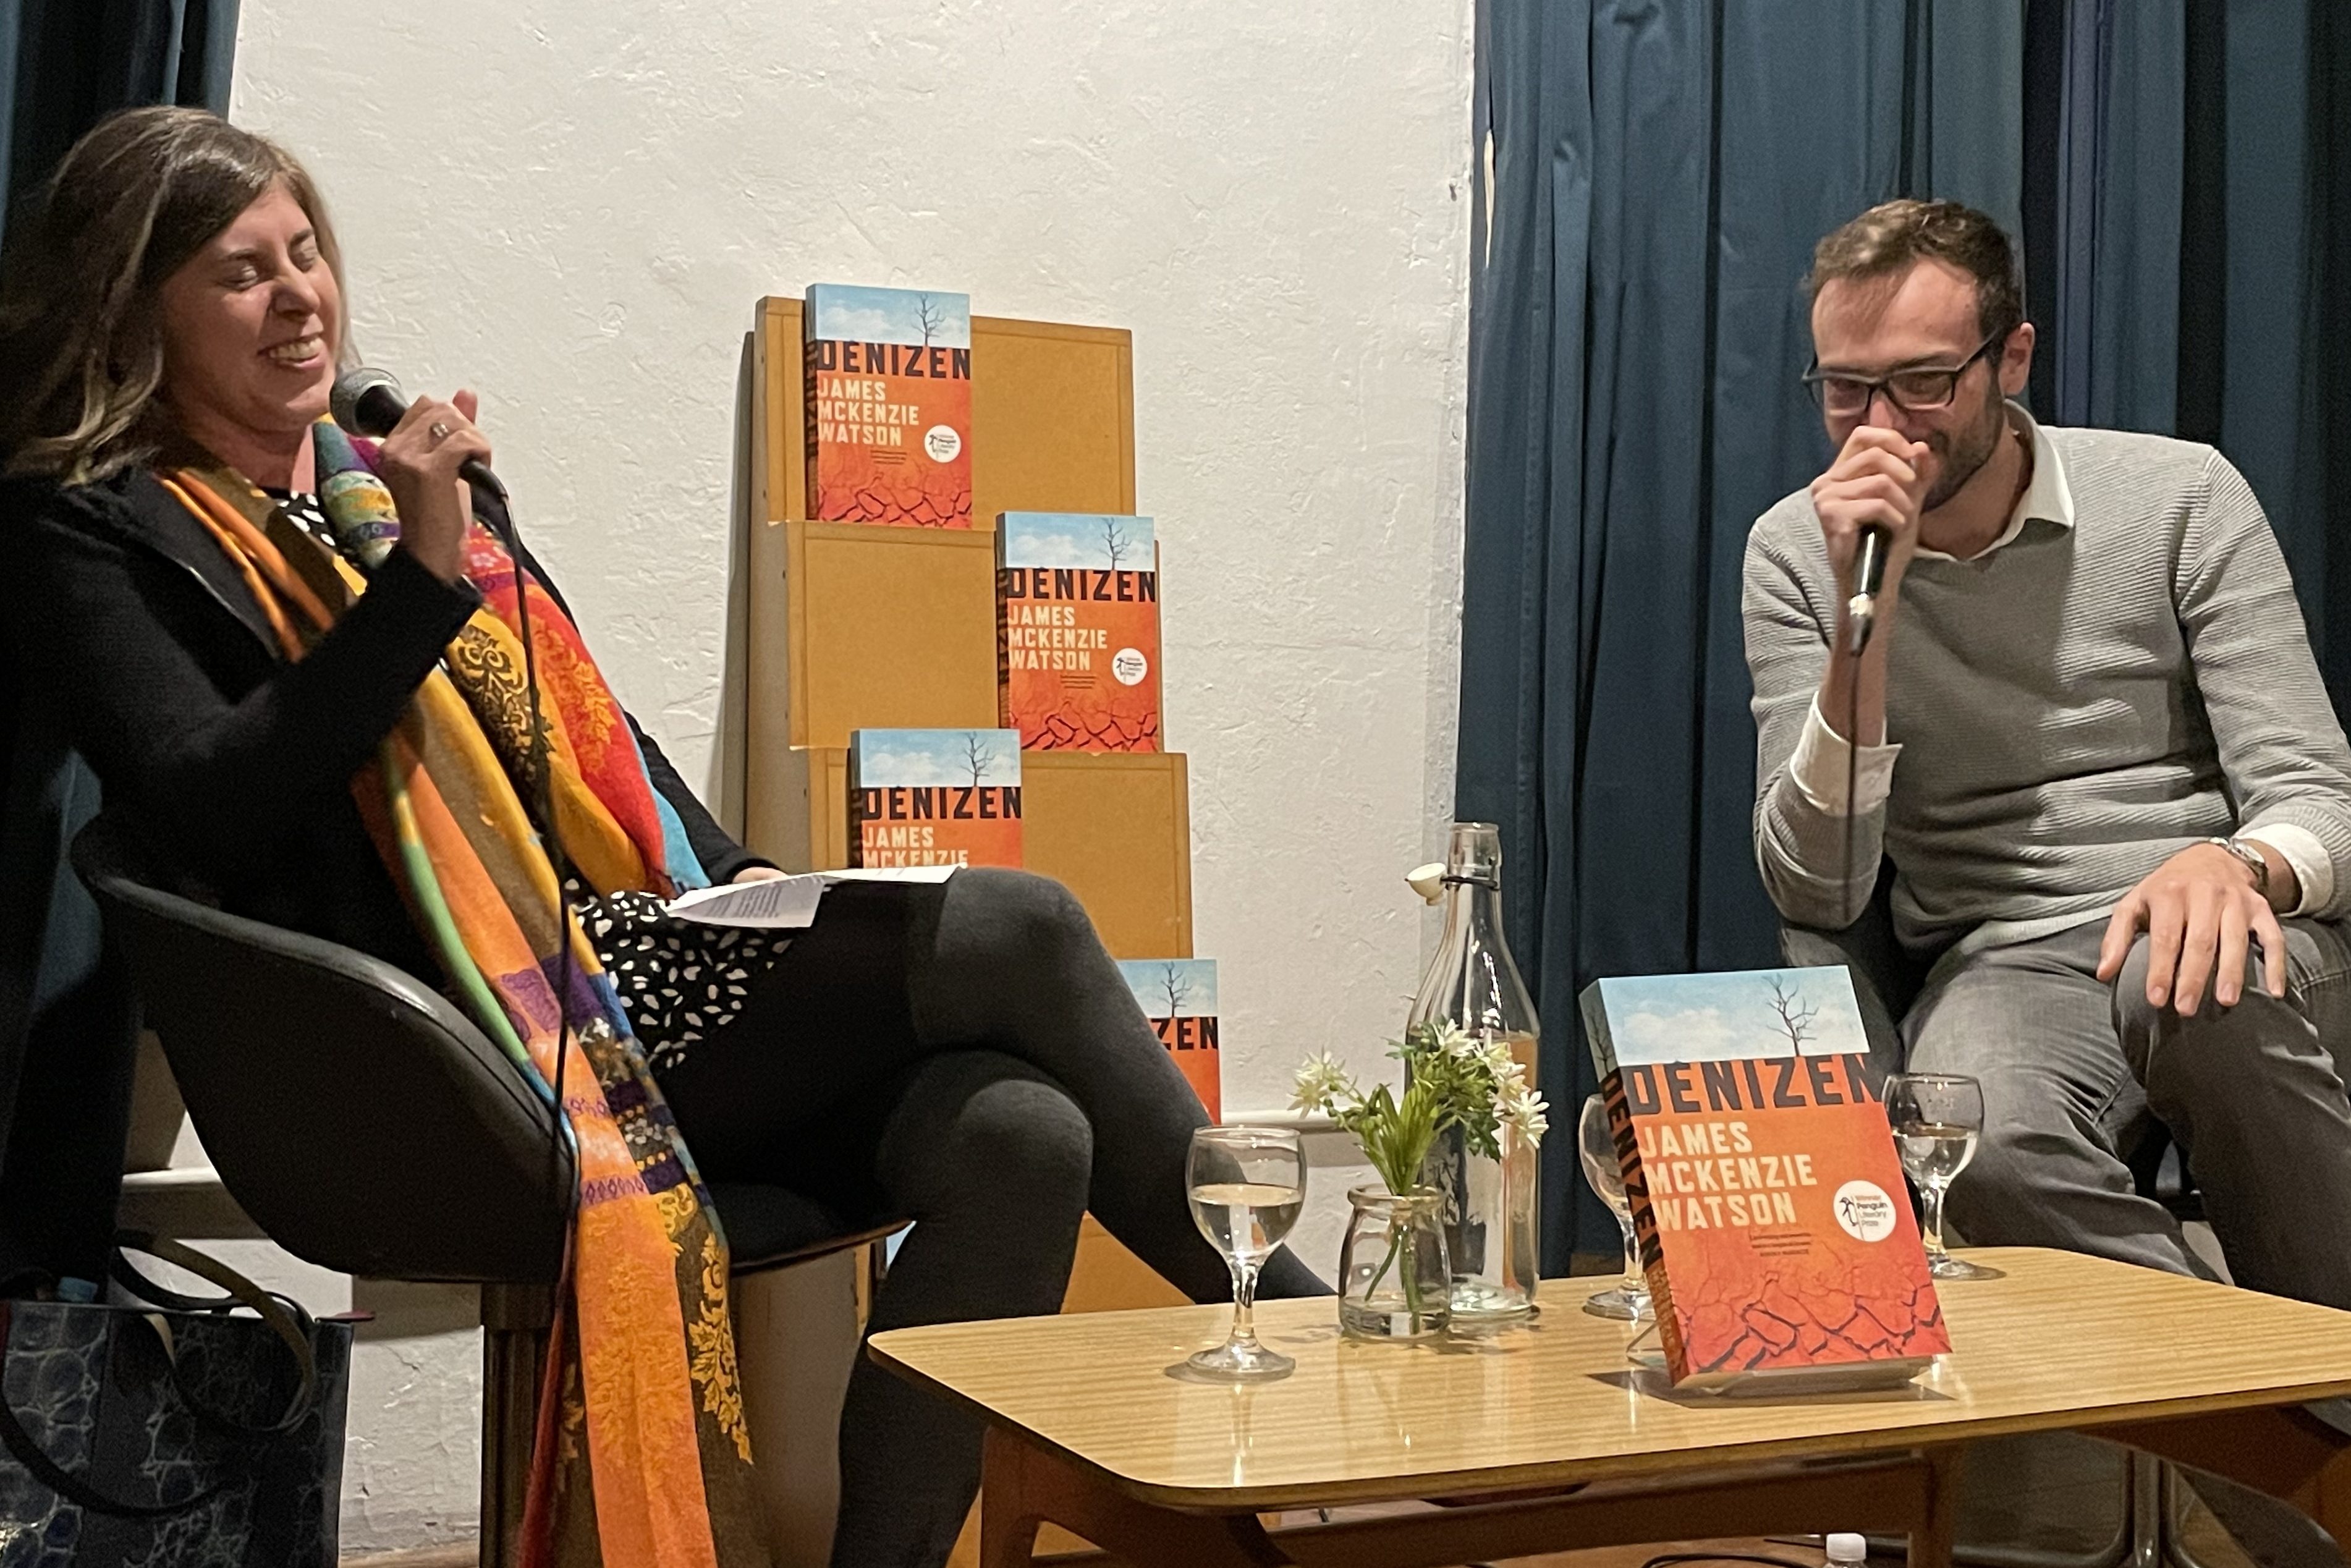 Authors Ashley Kalagian Blunt and James McKenzie Watson at the launch of Denizen, laughing